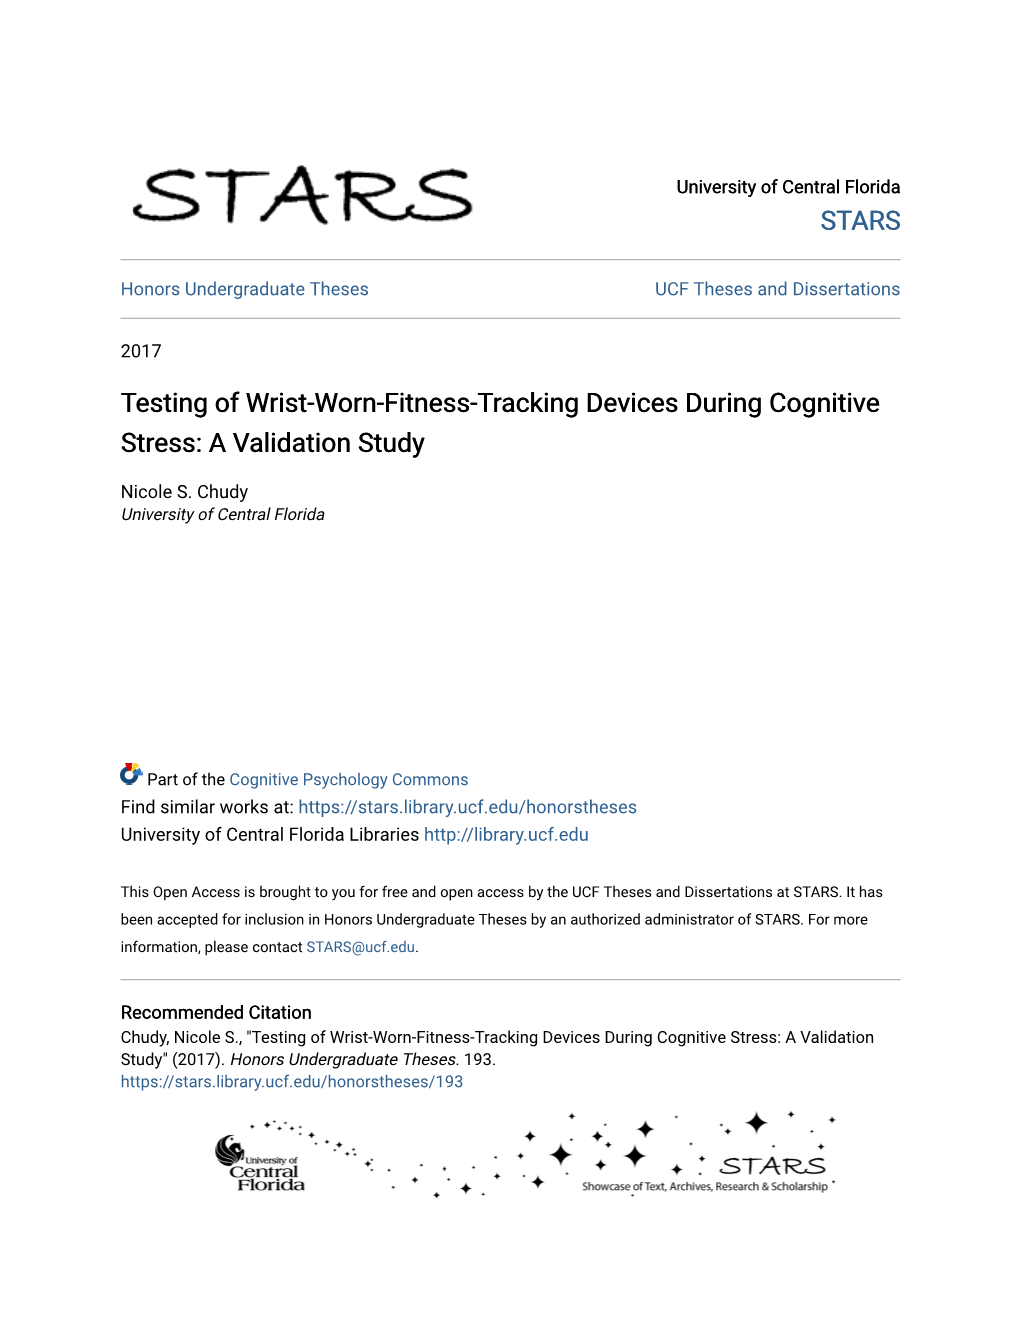 Testing of Wrist-Worn-Fitness-Tracking Devices During Cognitive Stress: a Validation Study